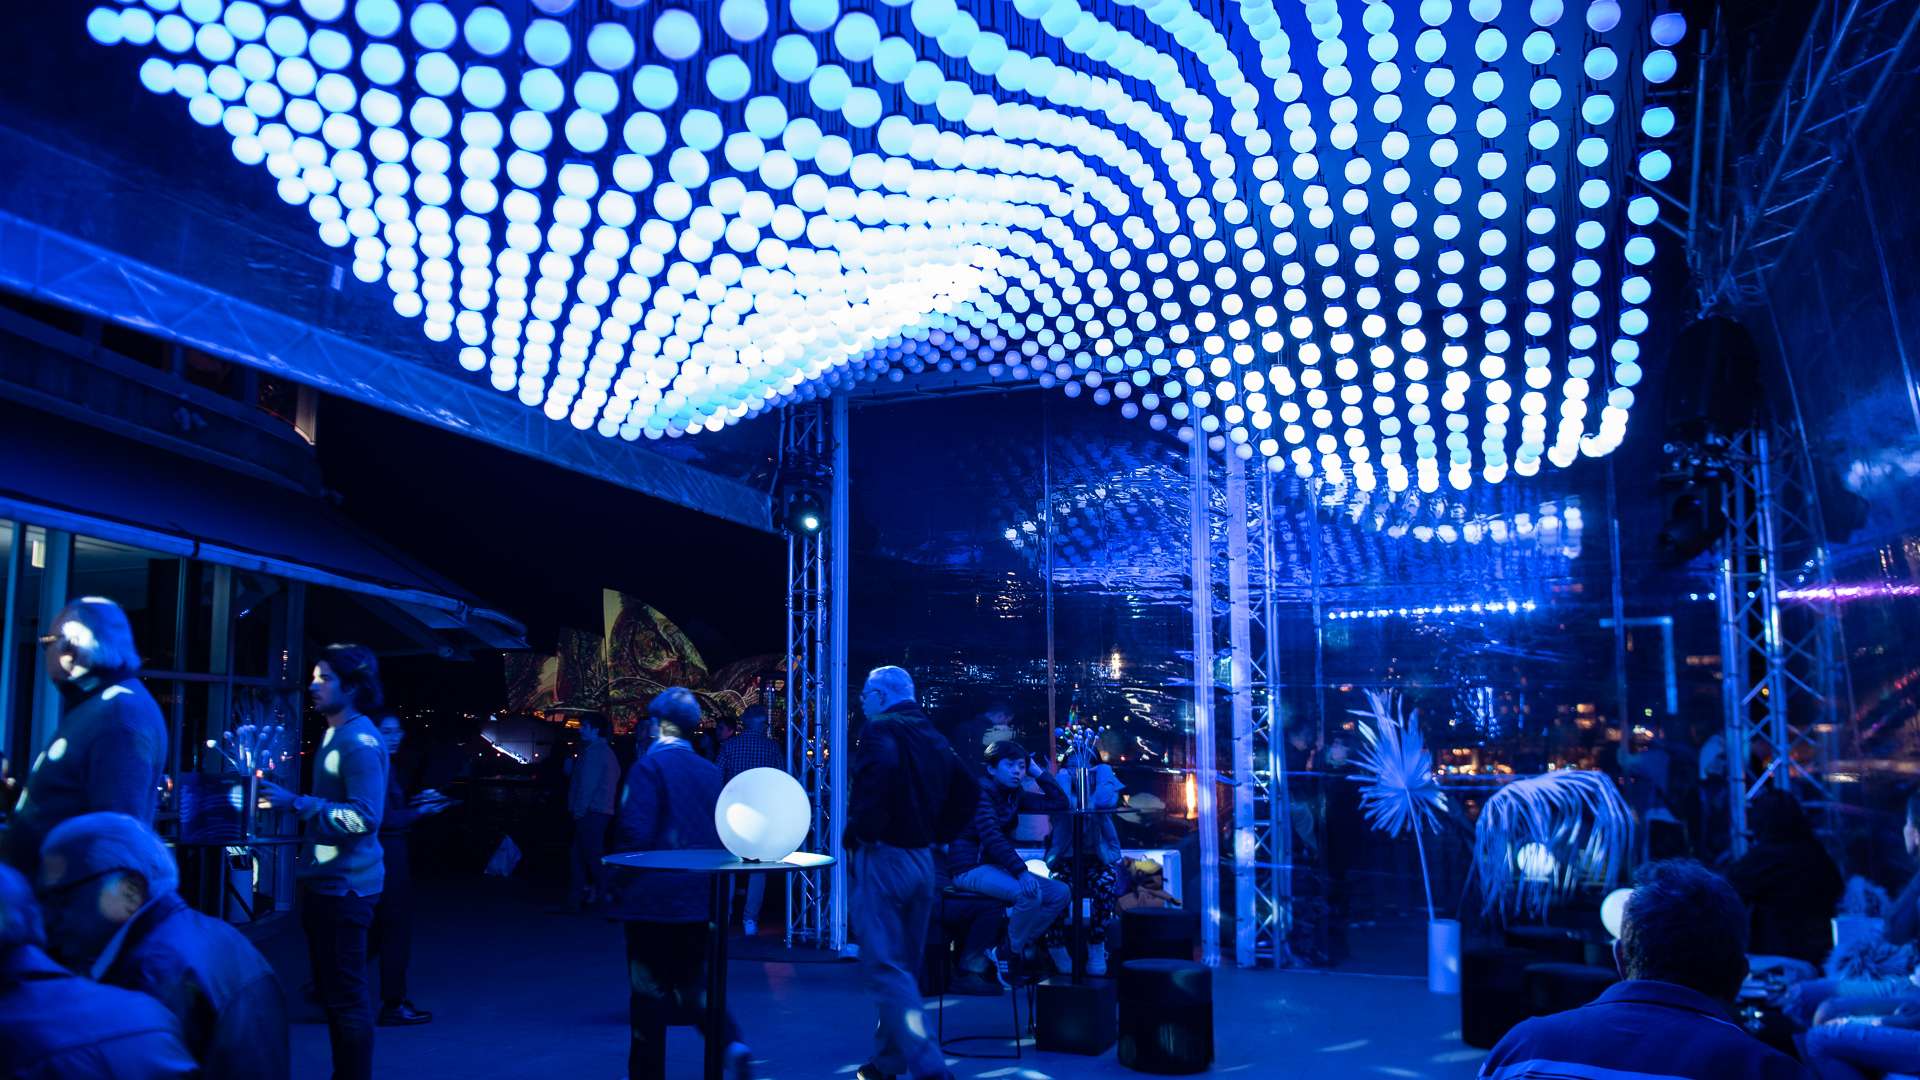 A Look Inside The American Express Vivid Lounge